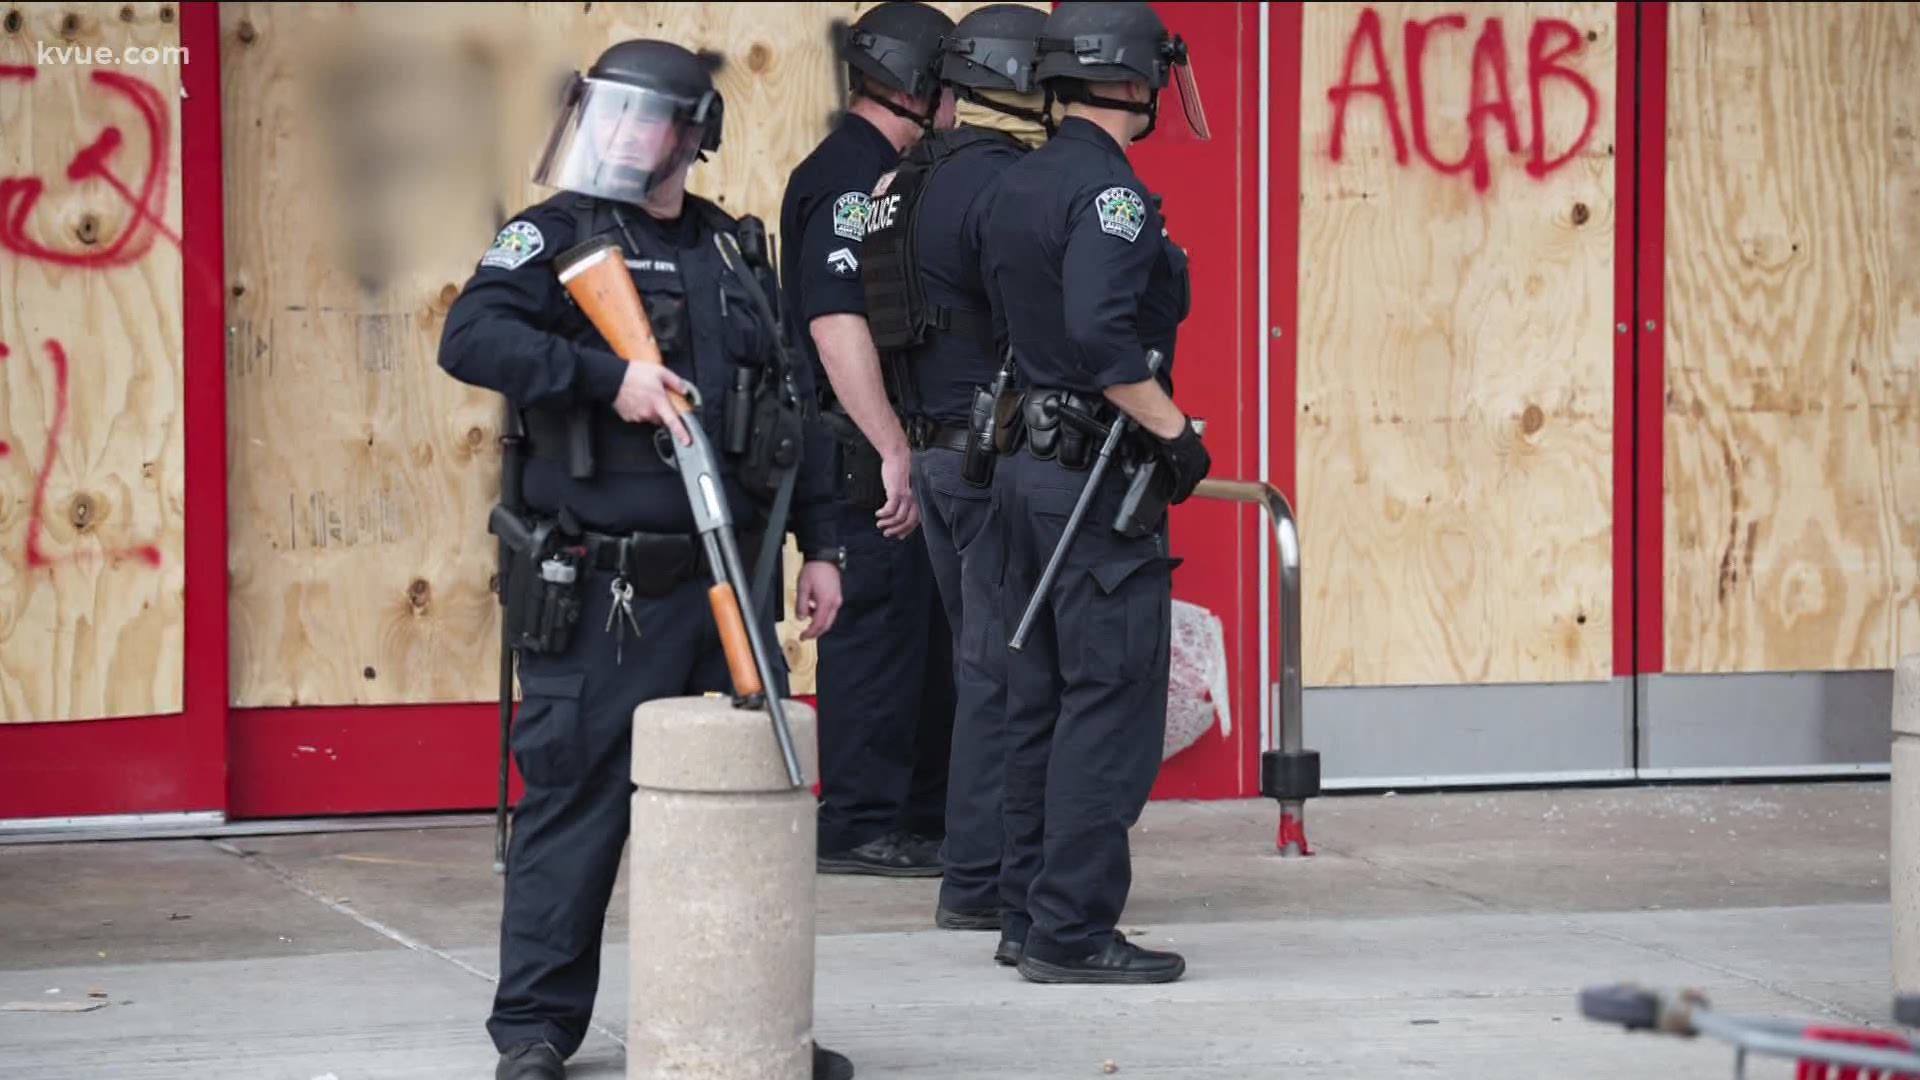 Austin police said it responded to the Target in Capital Plaza regarding reports of looting.